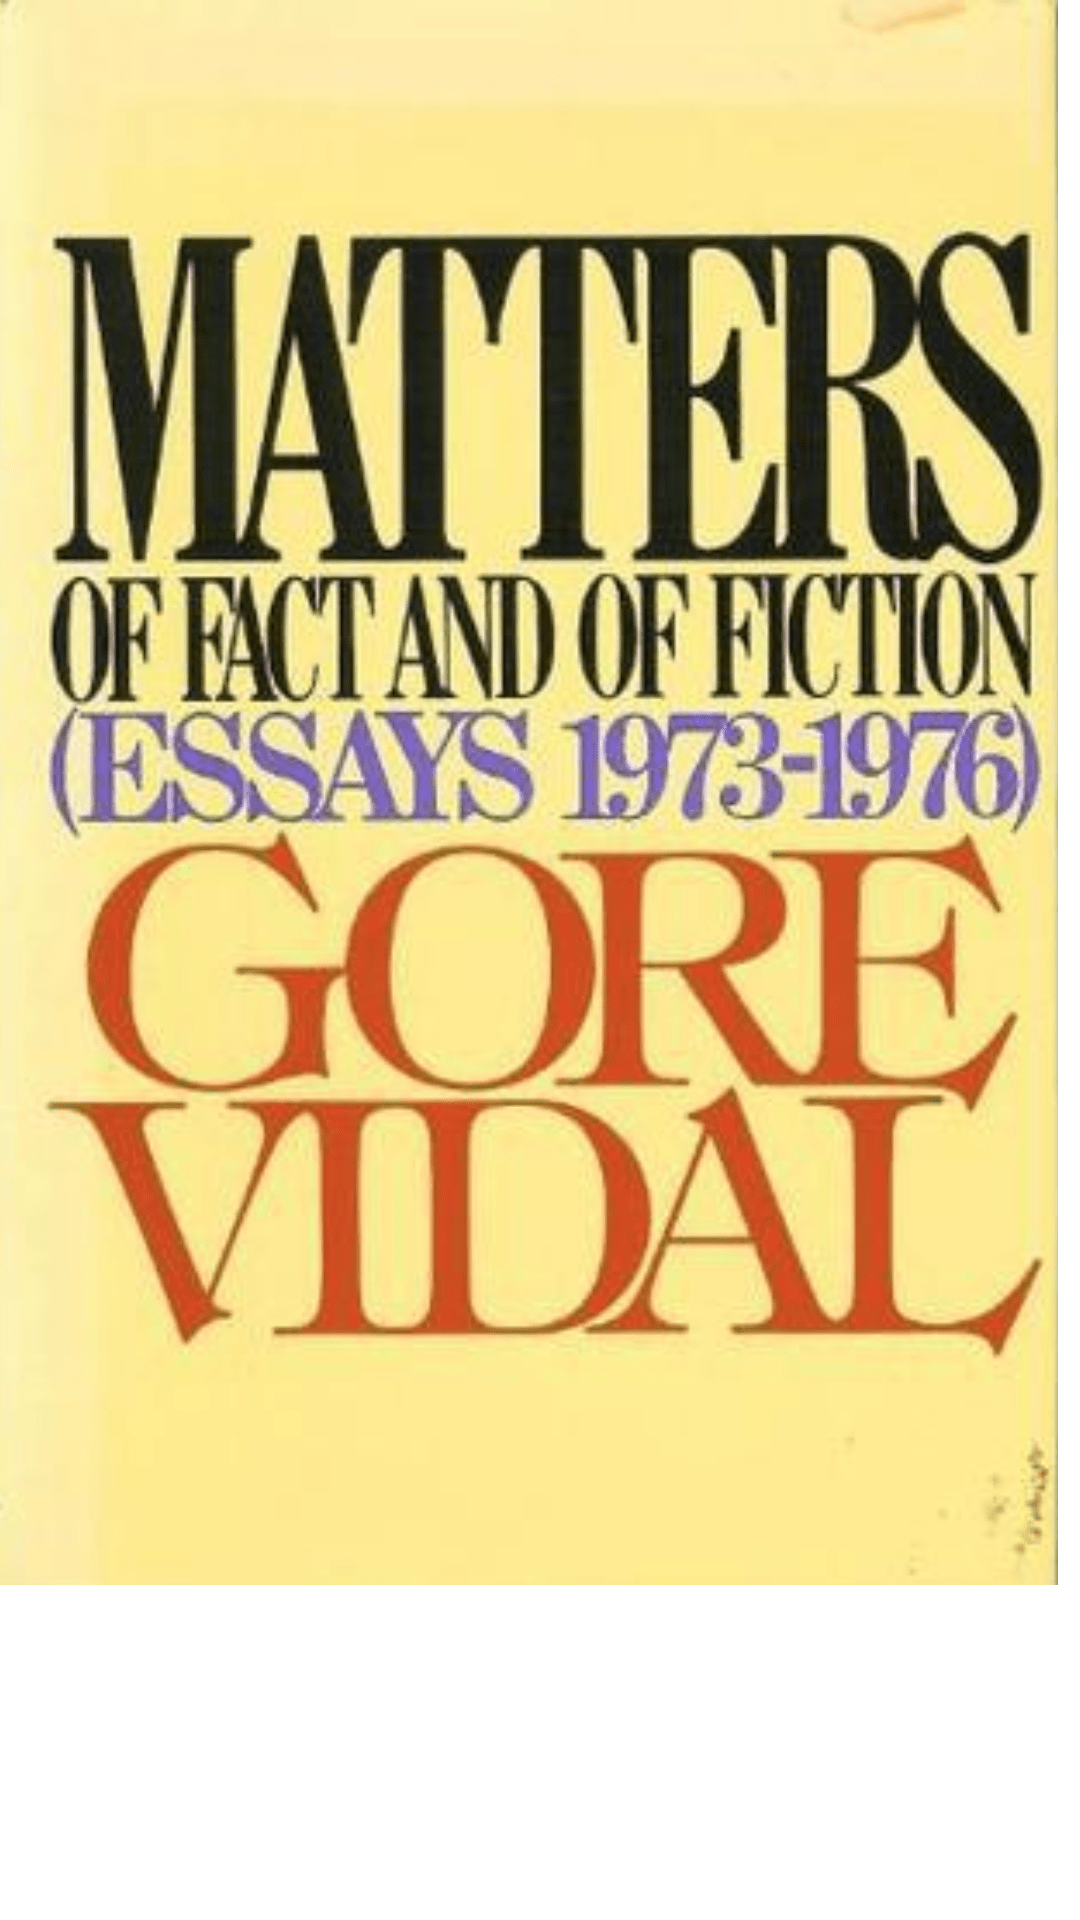 Matters of Fact and Fiction: Essays 1973-1976